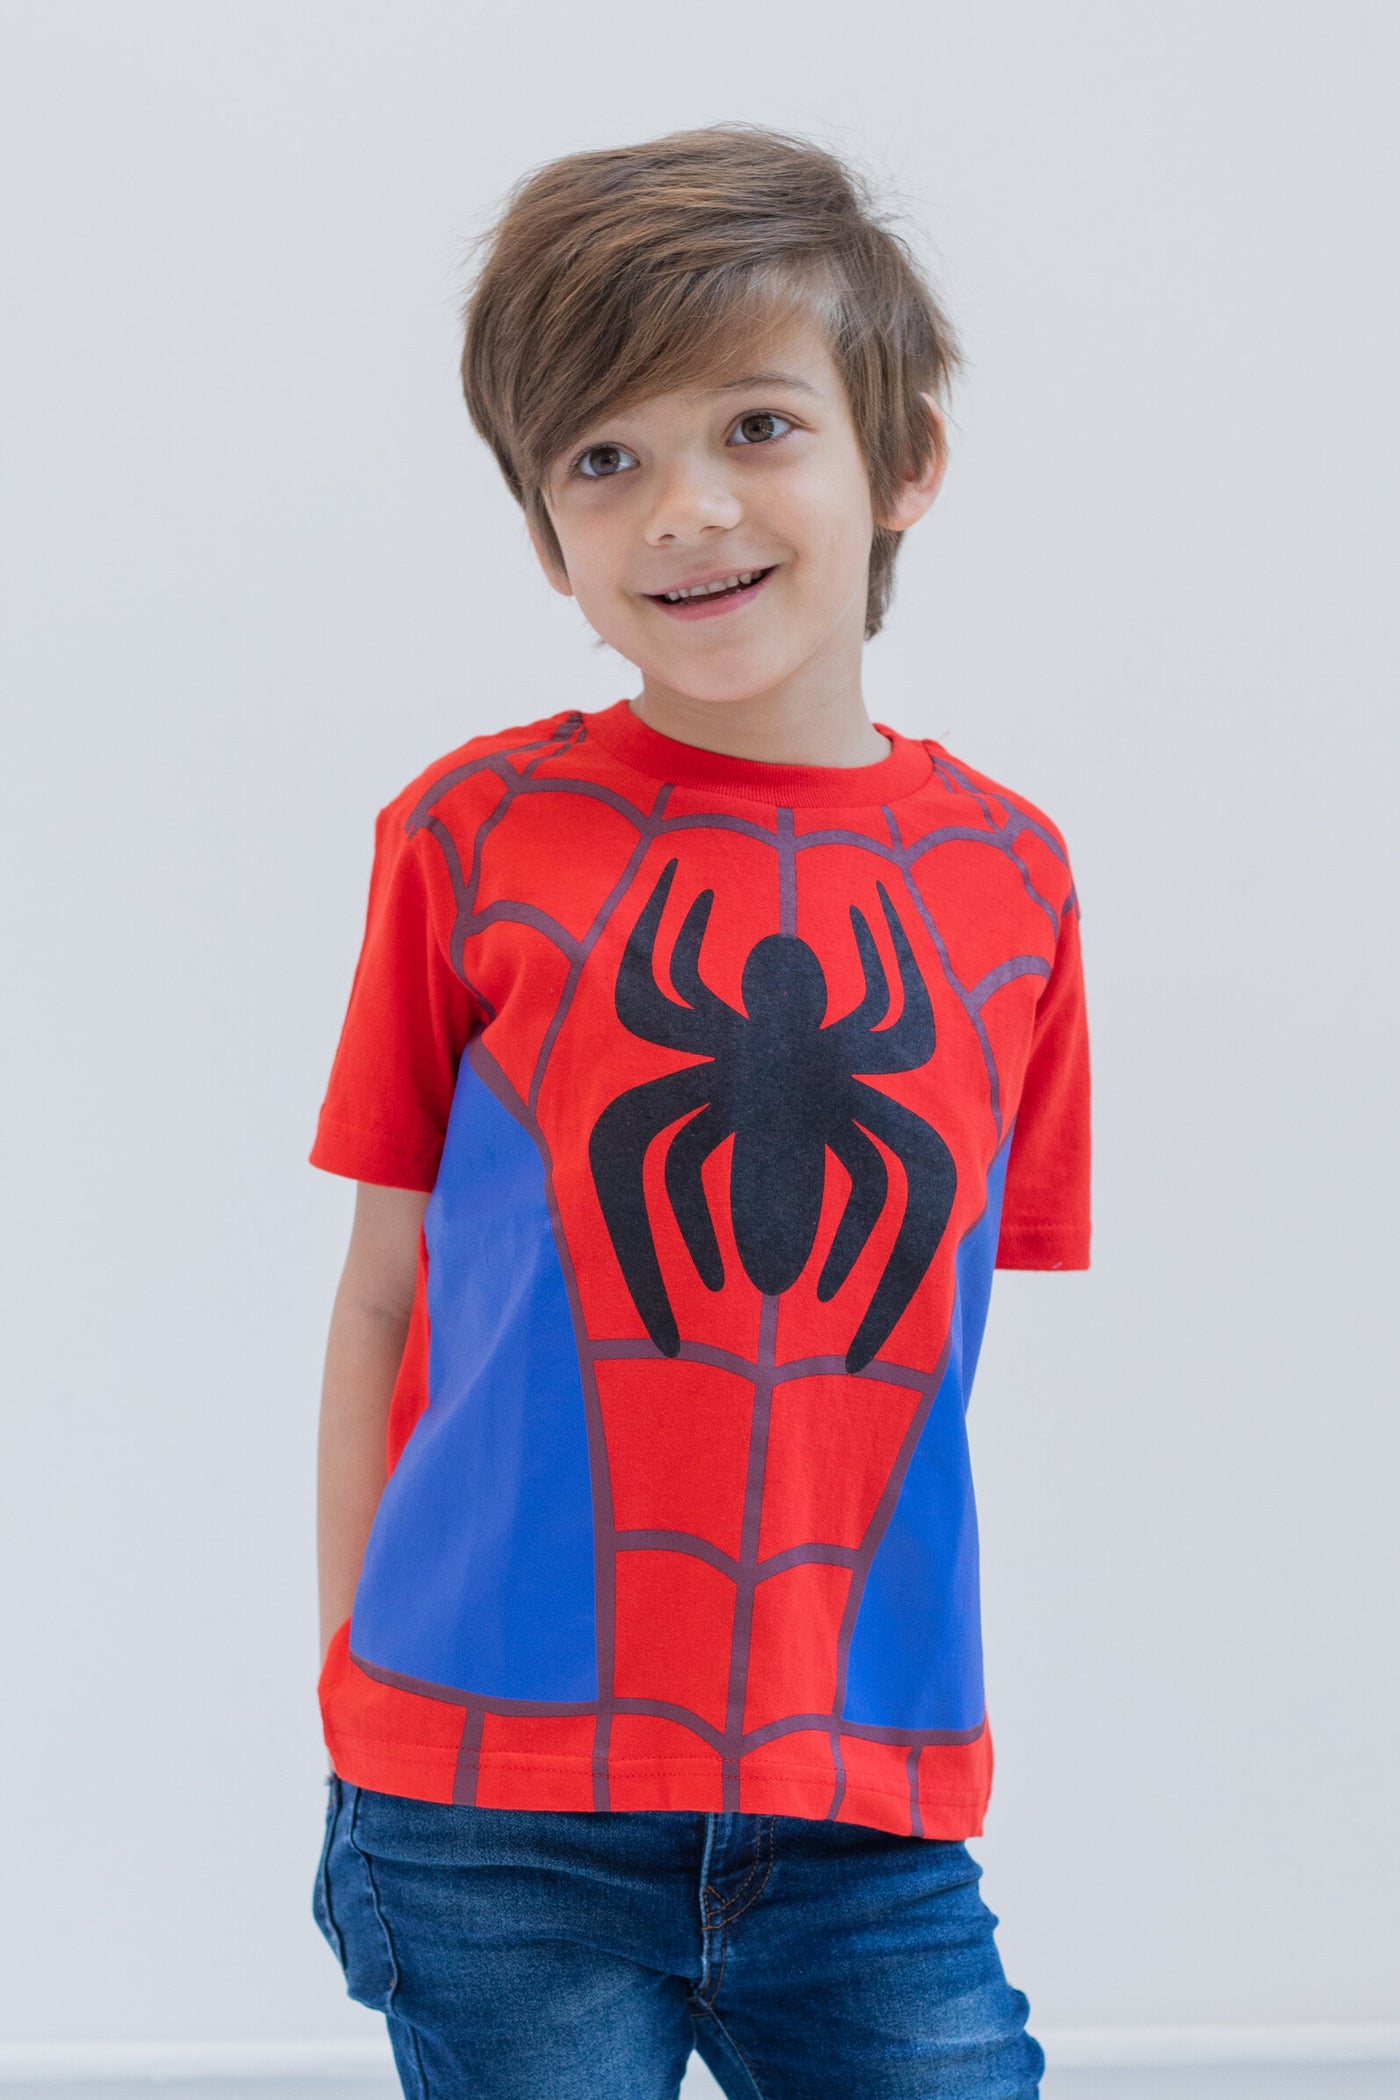 Marvel Spidey and His Amazing Friends 3 Pack T-Shirts